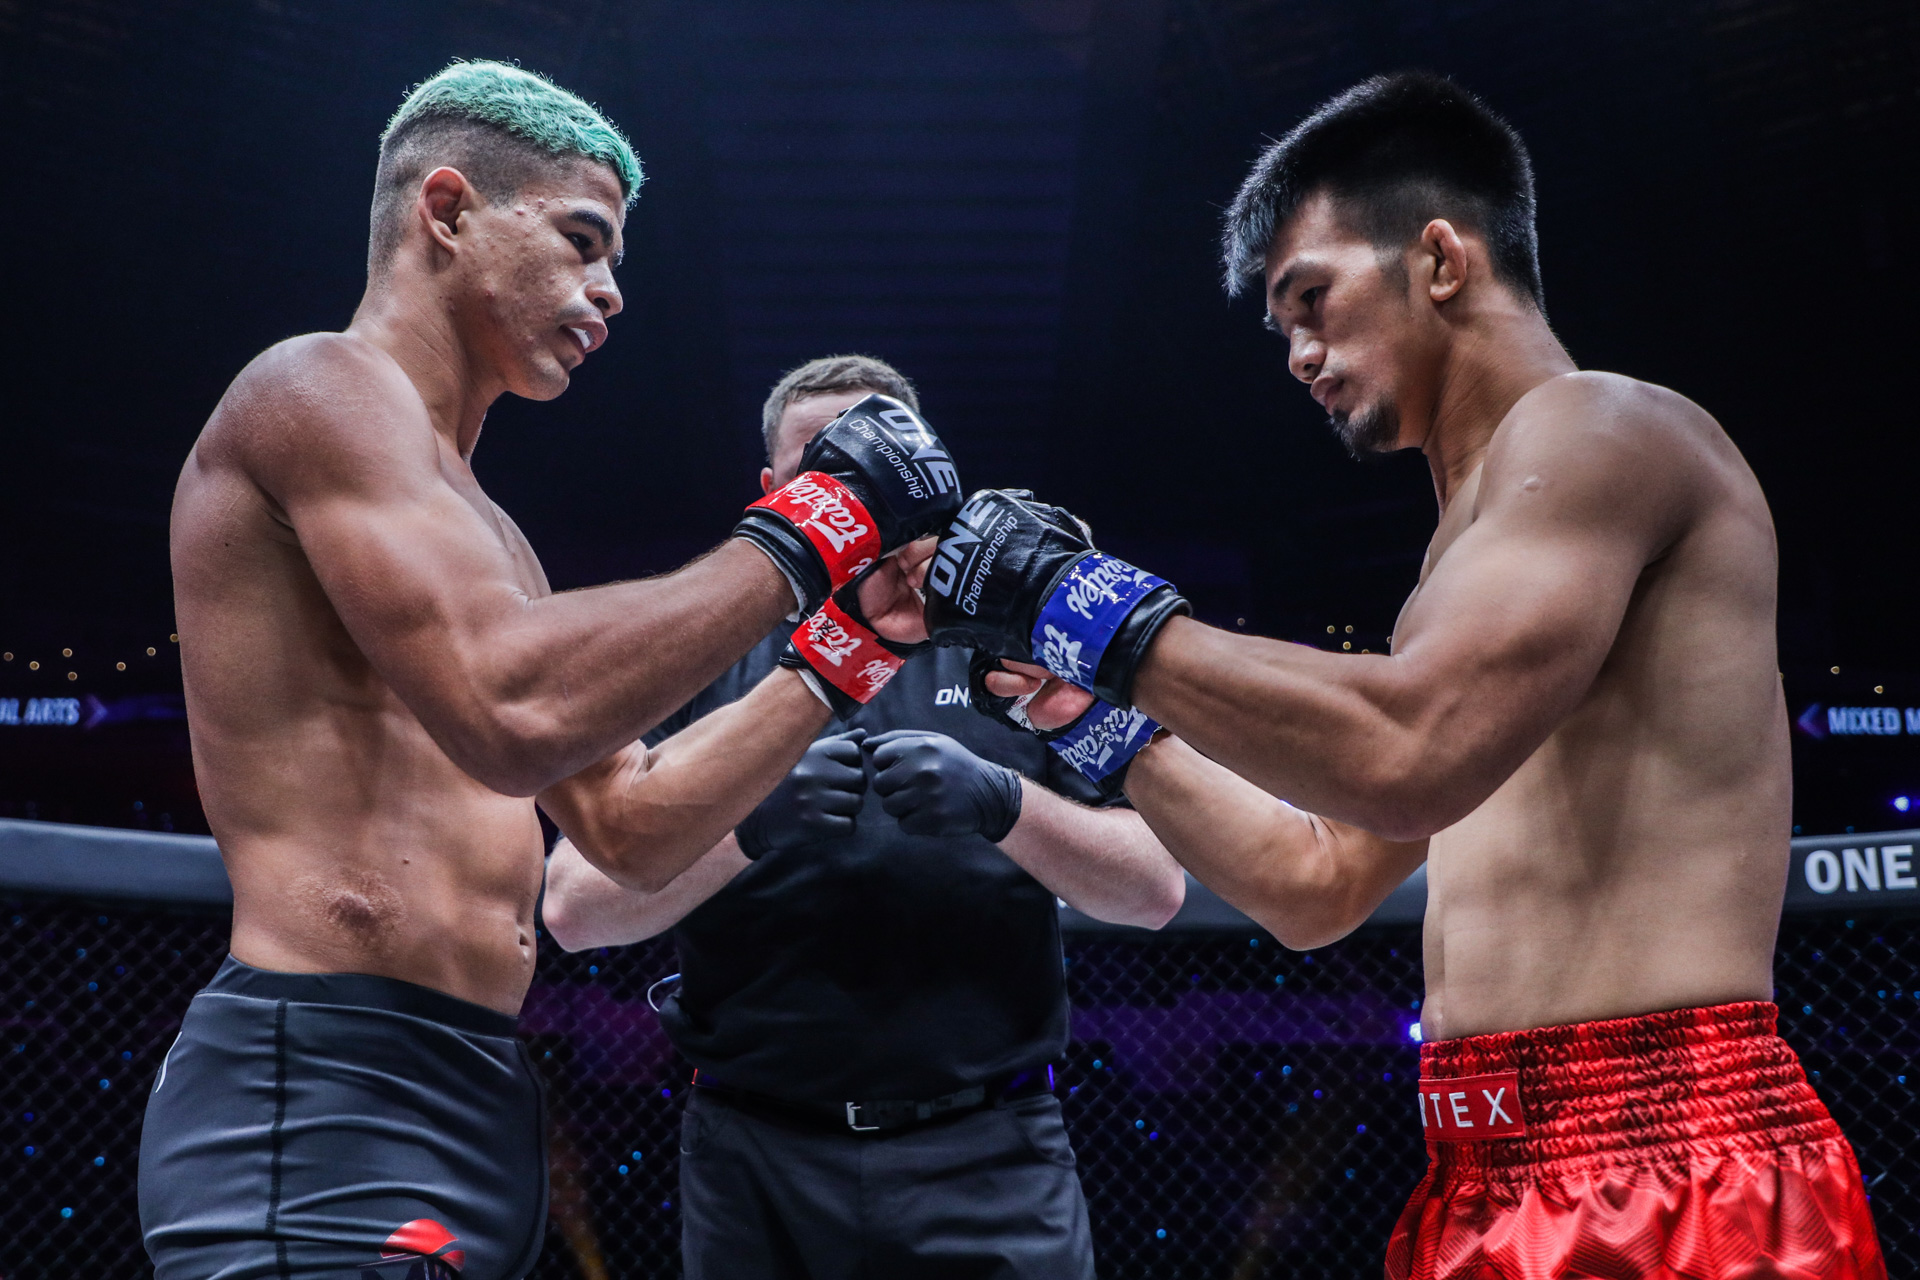 ONE-Full-Circle-Andrade-def-Pacatiw-2 Pacatiw sees loss to Andrade as a 'minor setback' Mixed Martial Arts News ONE Championship  - philippine sports news